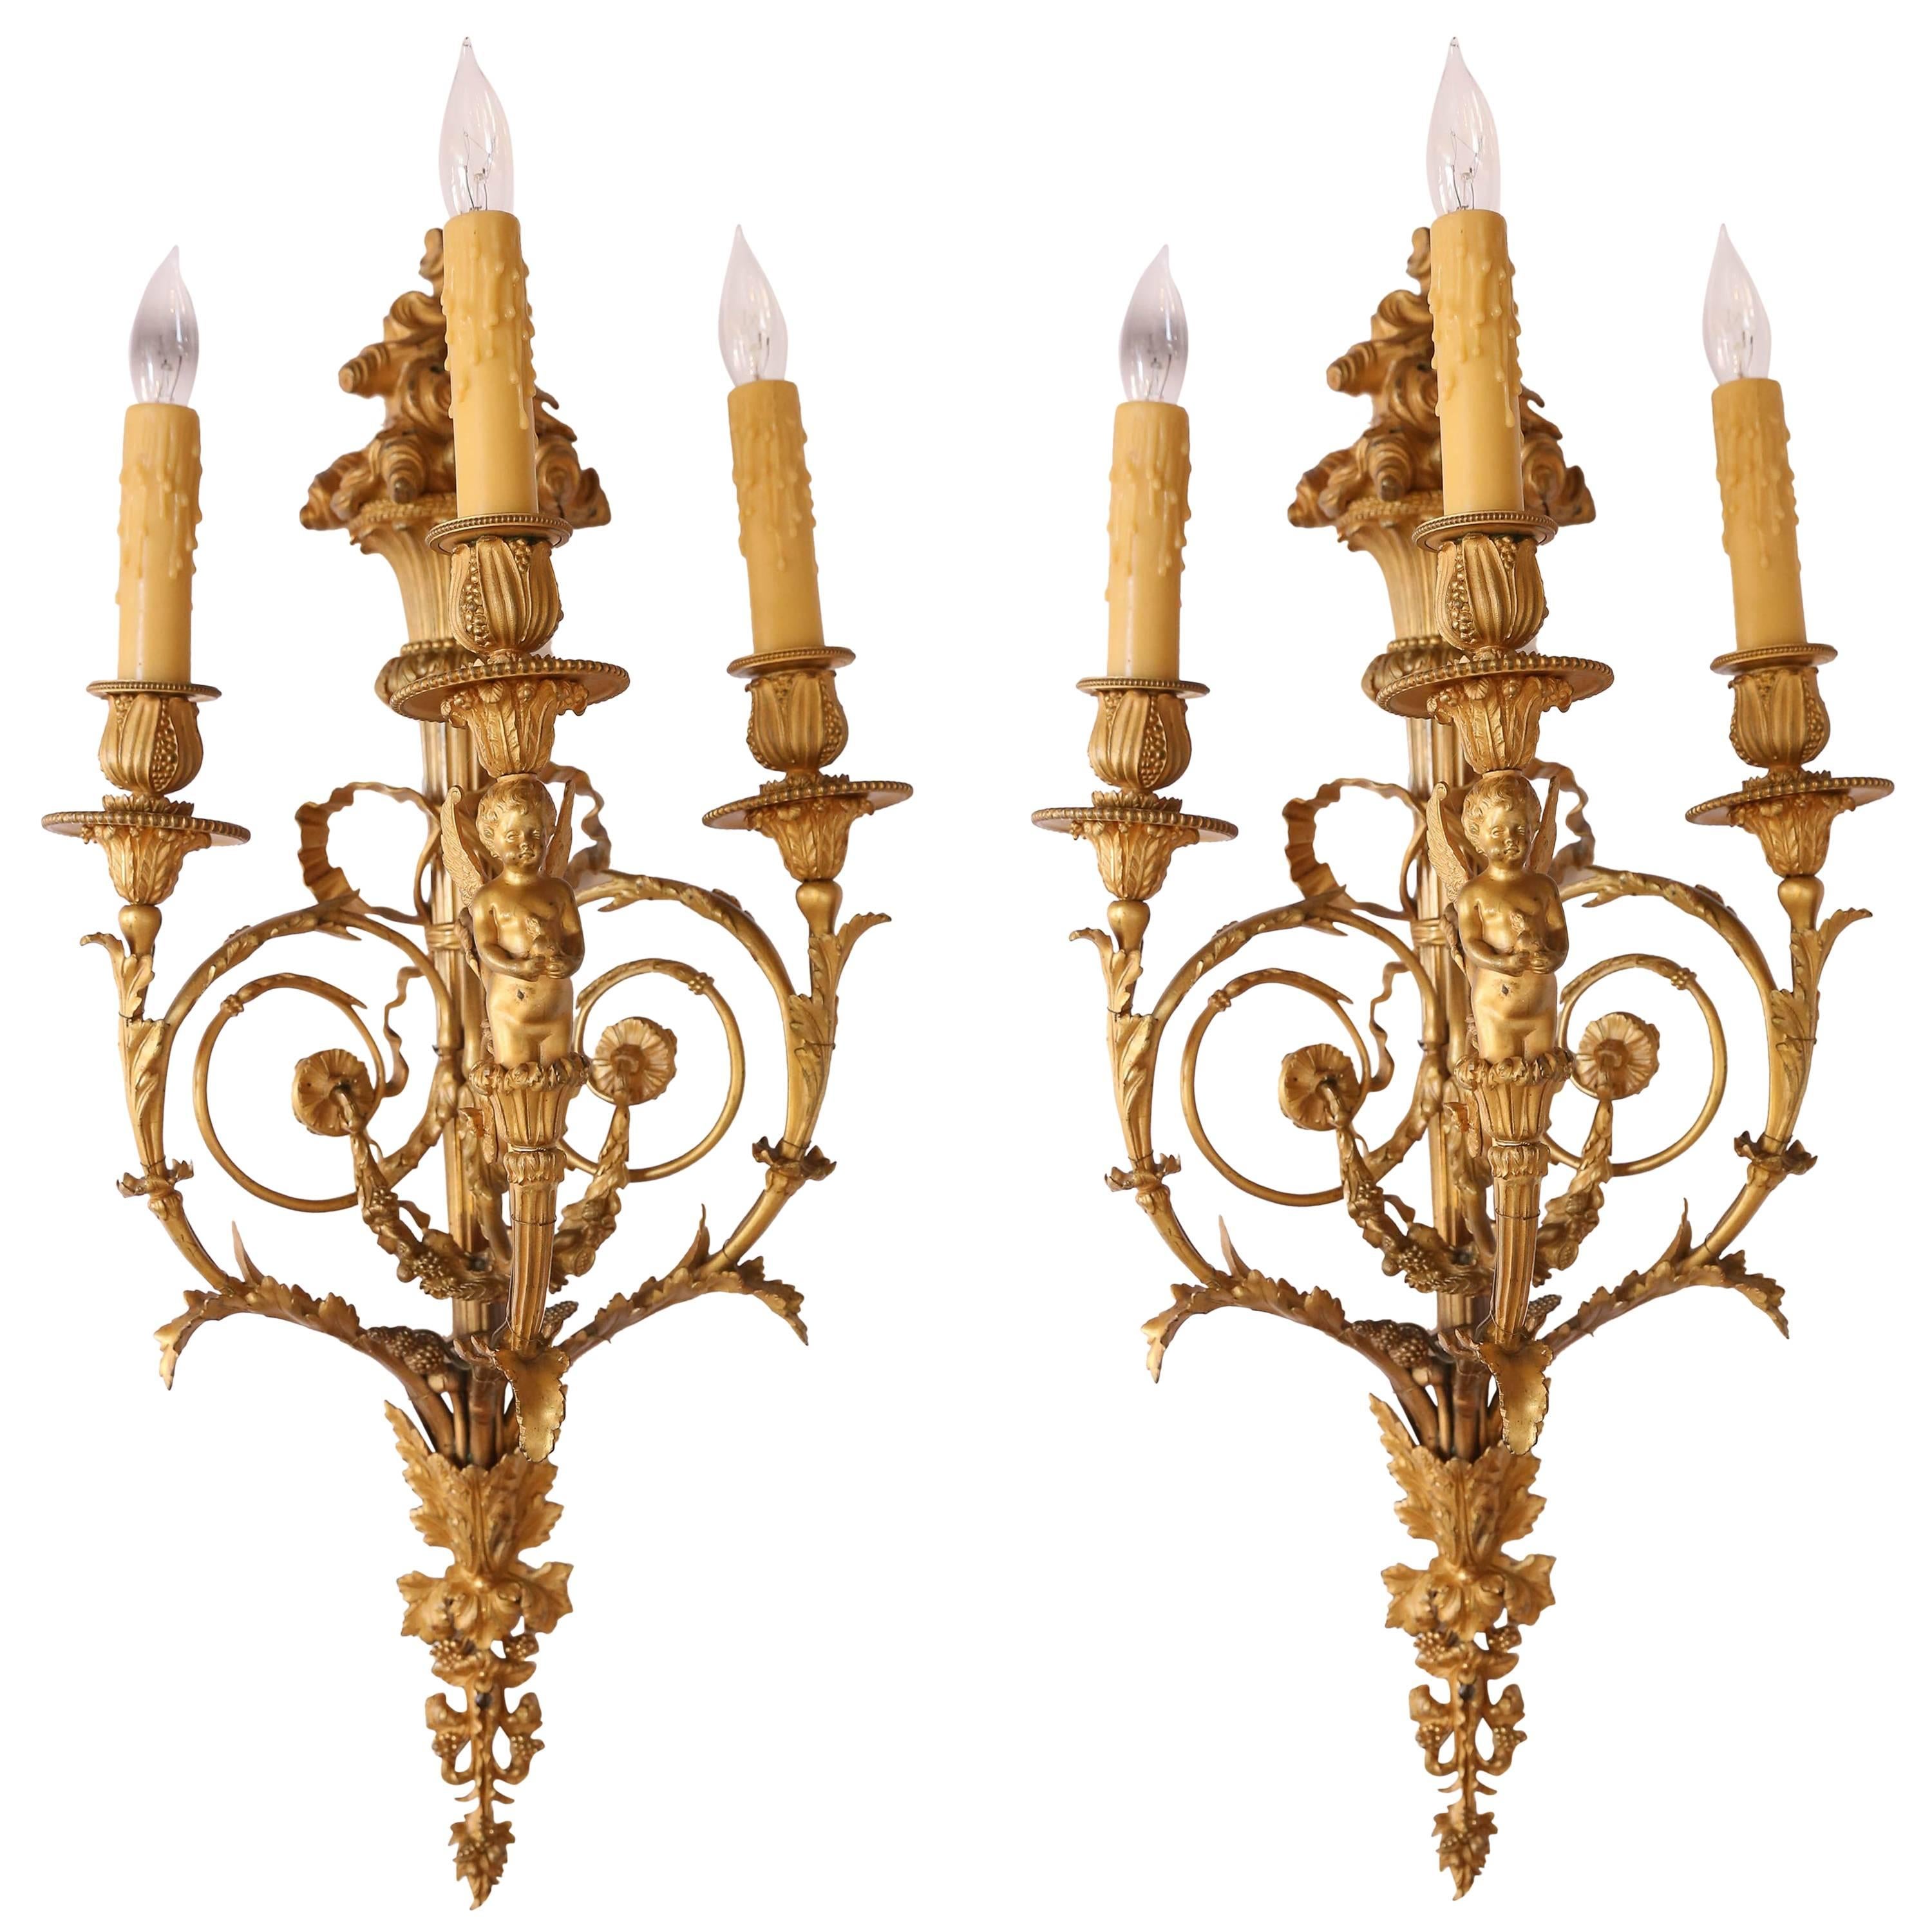 Pair of 19th Century French Neoclassic Gilt Bronze Sconces, Three Lights, Wired